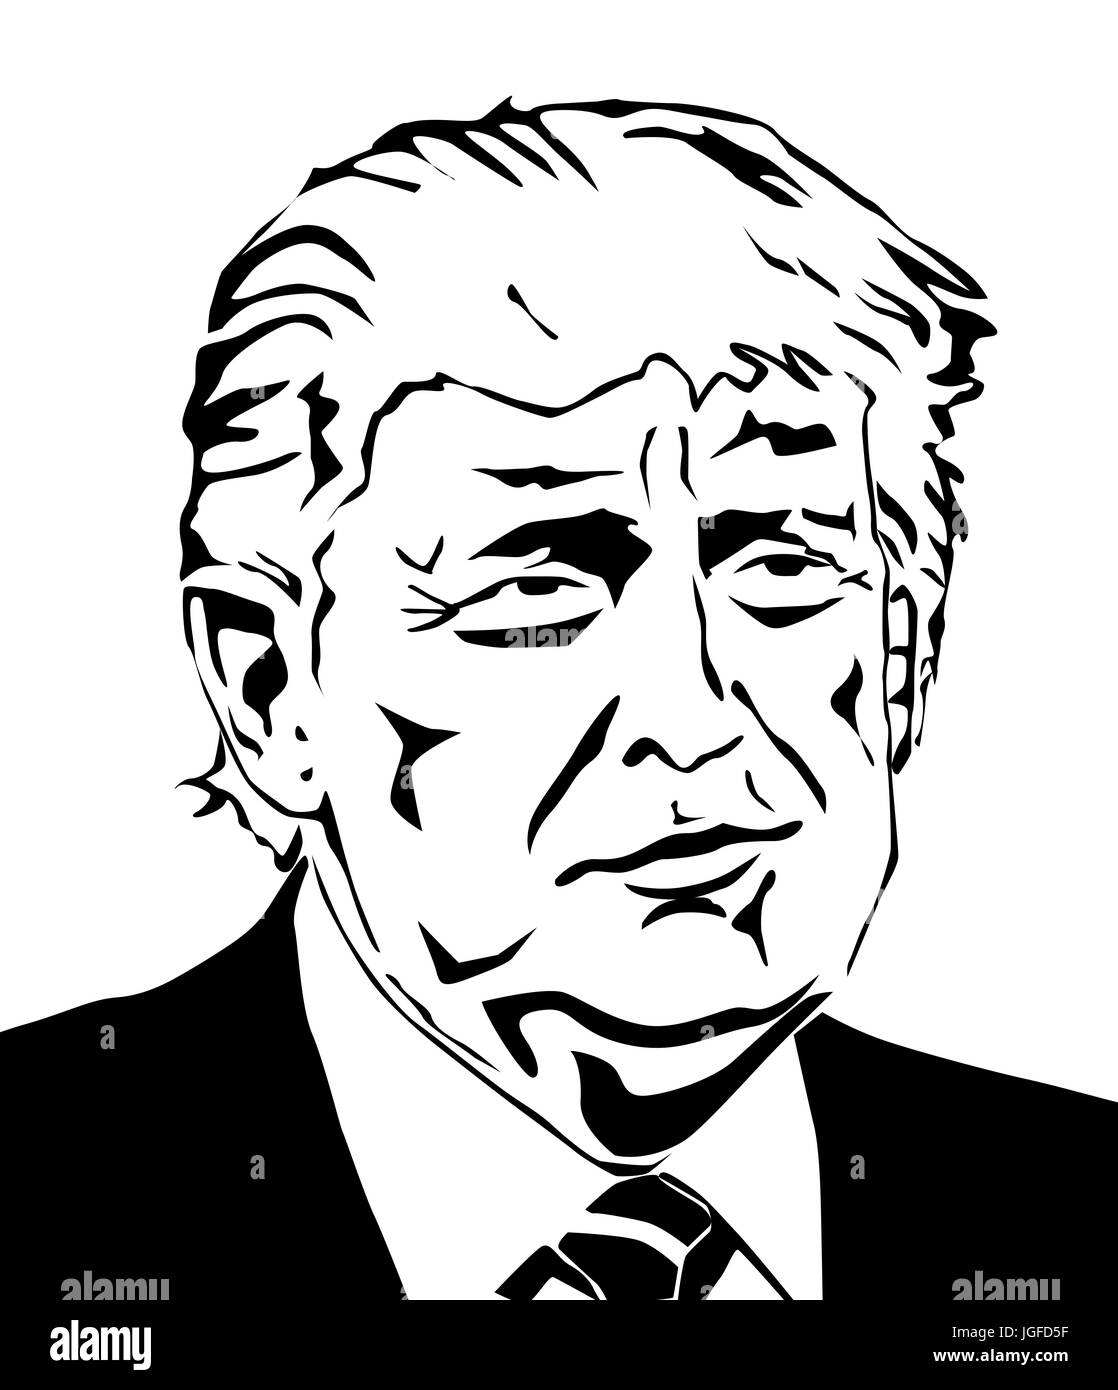 Donald Trump Vector Portrait Illustration The 45th President of the United States Stock Photo